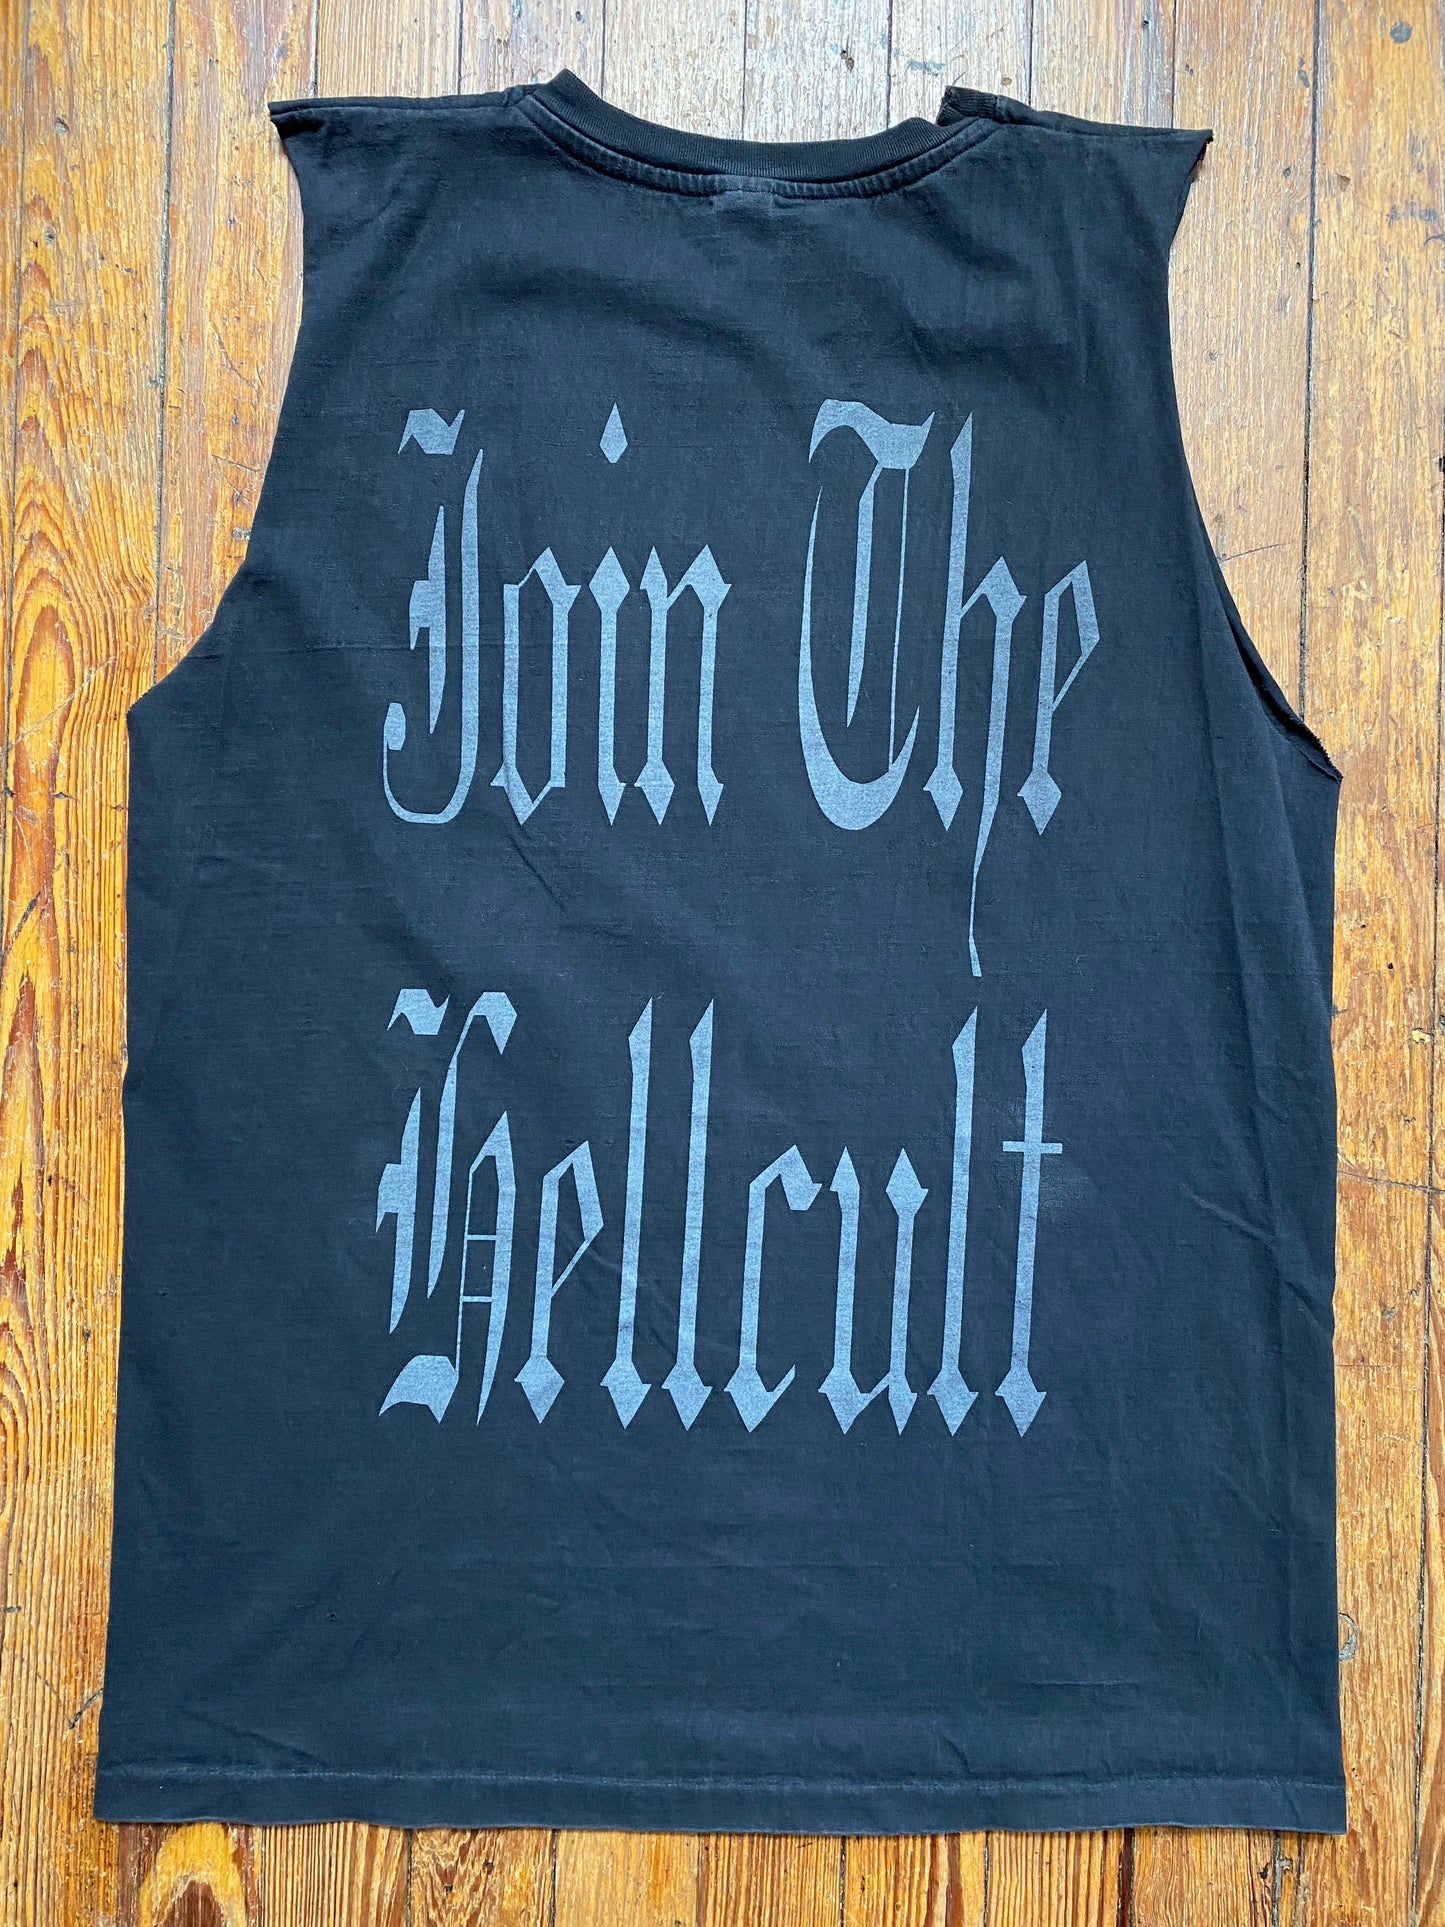 Bewitched “Join the Hellcult” Cut Off Shirt